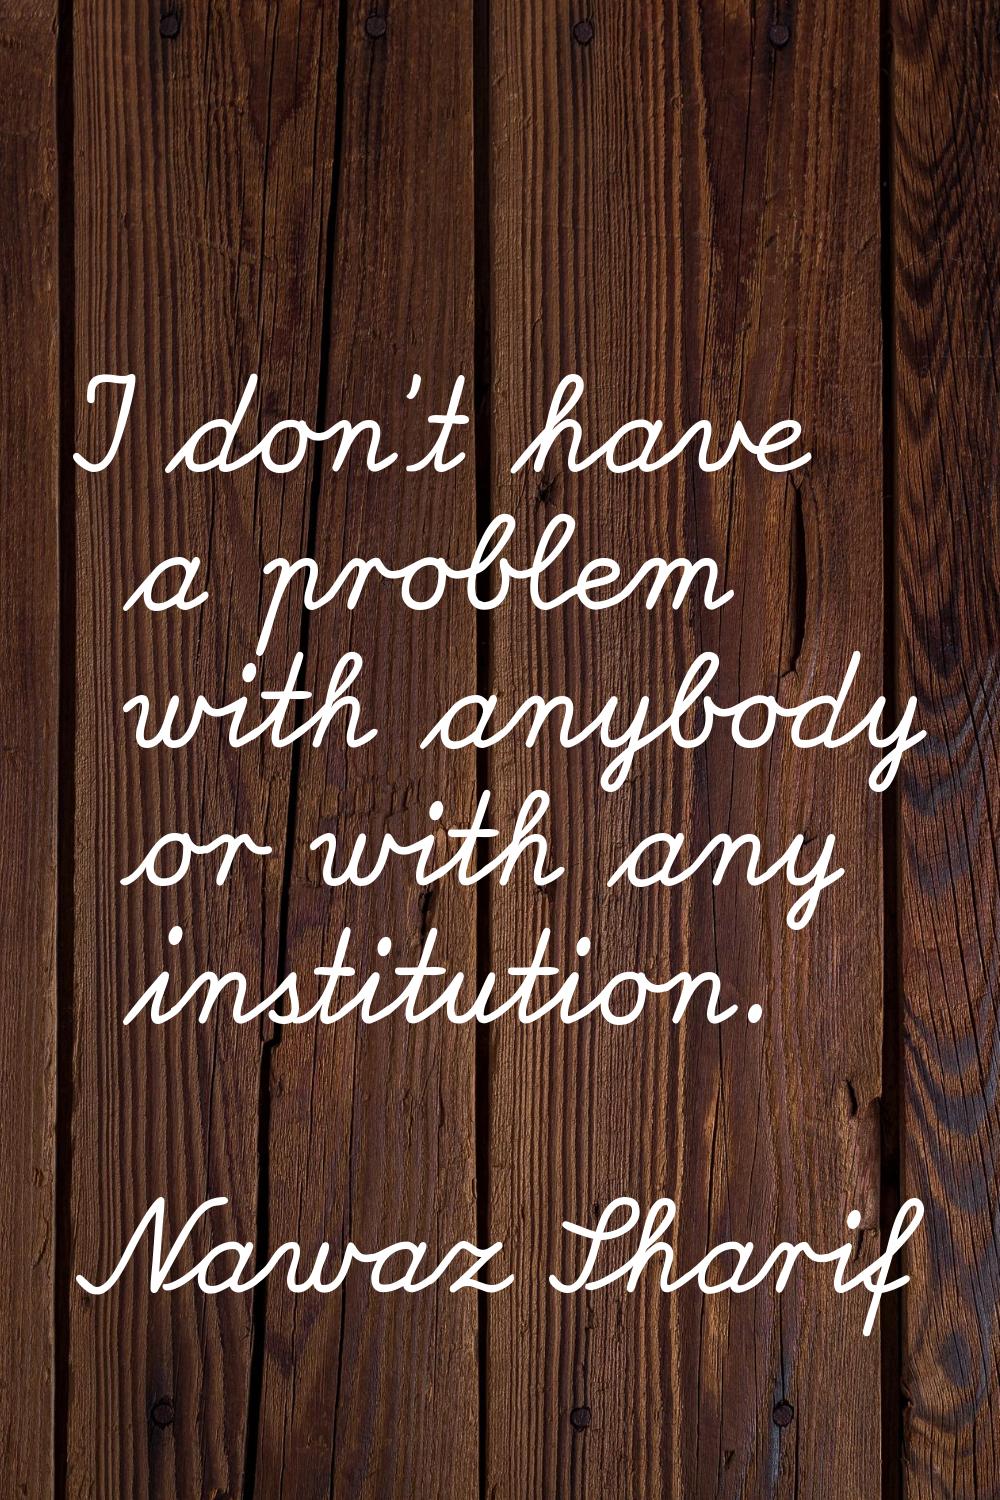 I don't have a problem with anybody or with any institution.